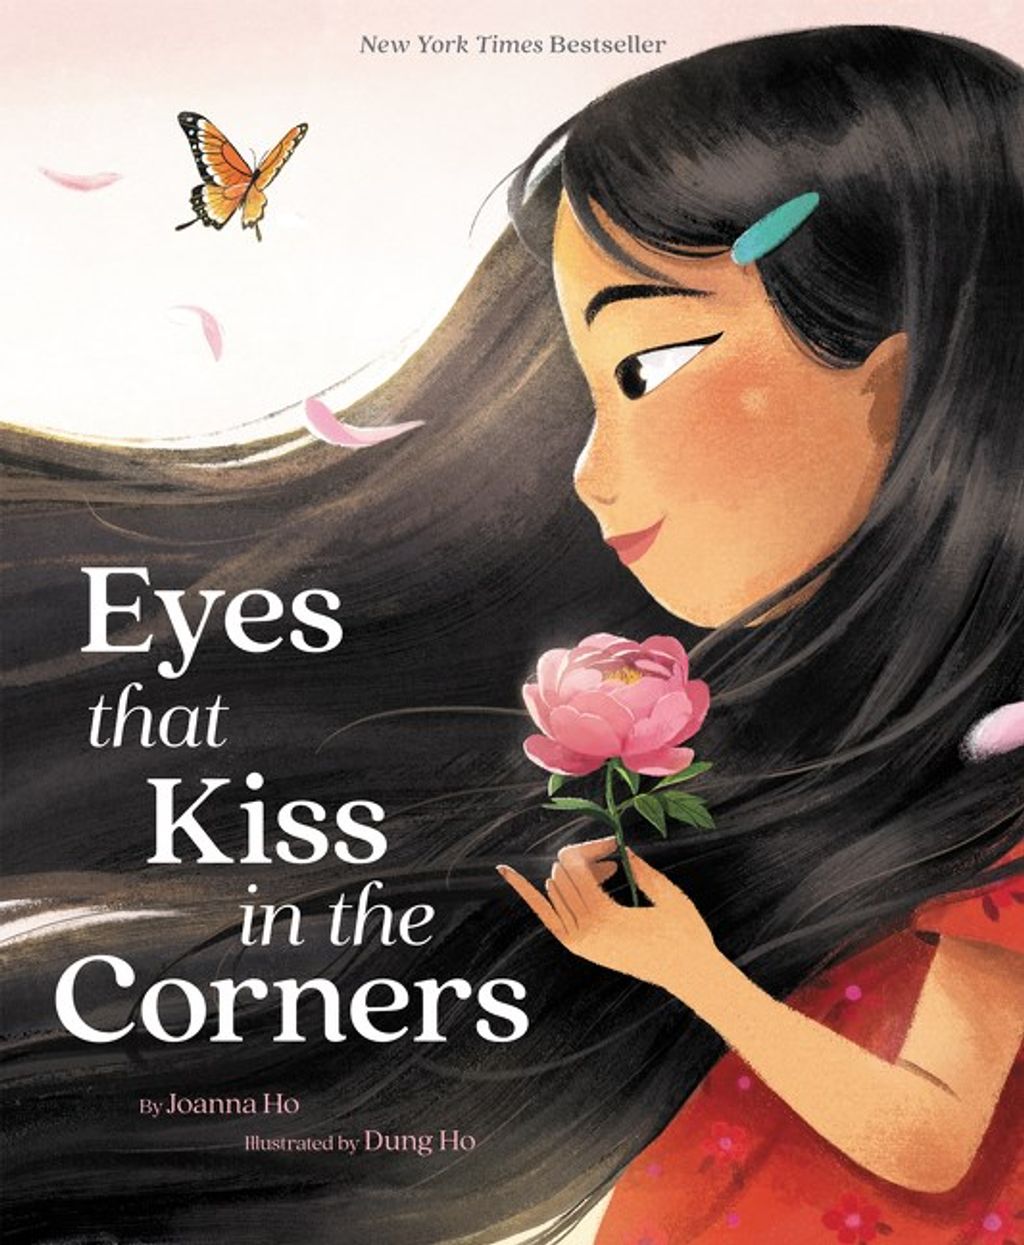 Book Cover of Eyes that Kiss in the Corners